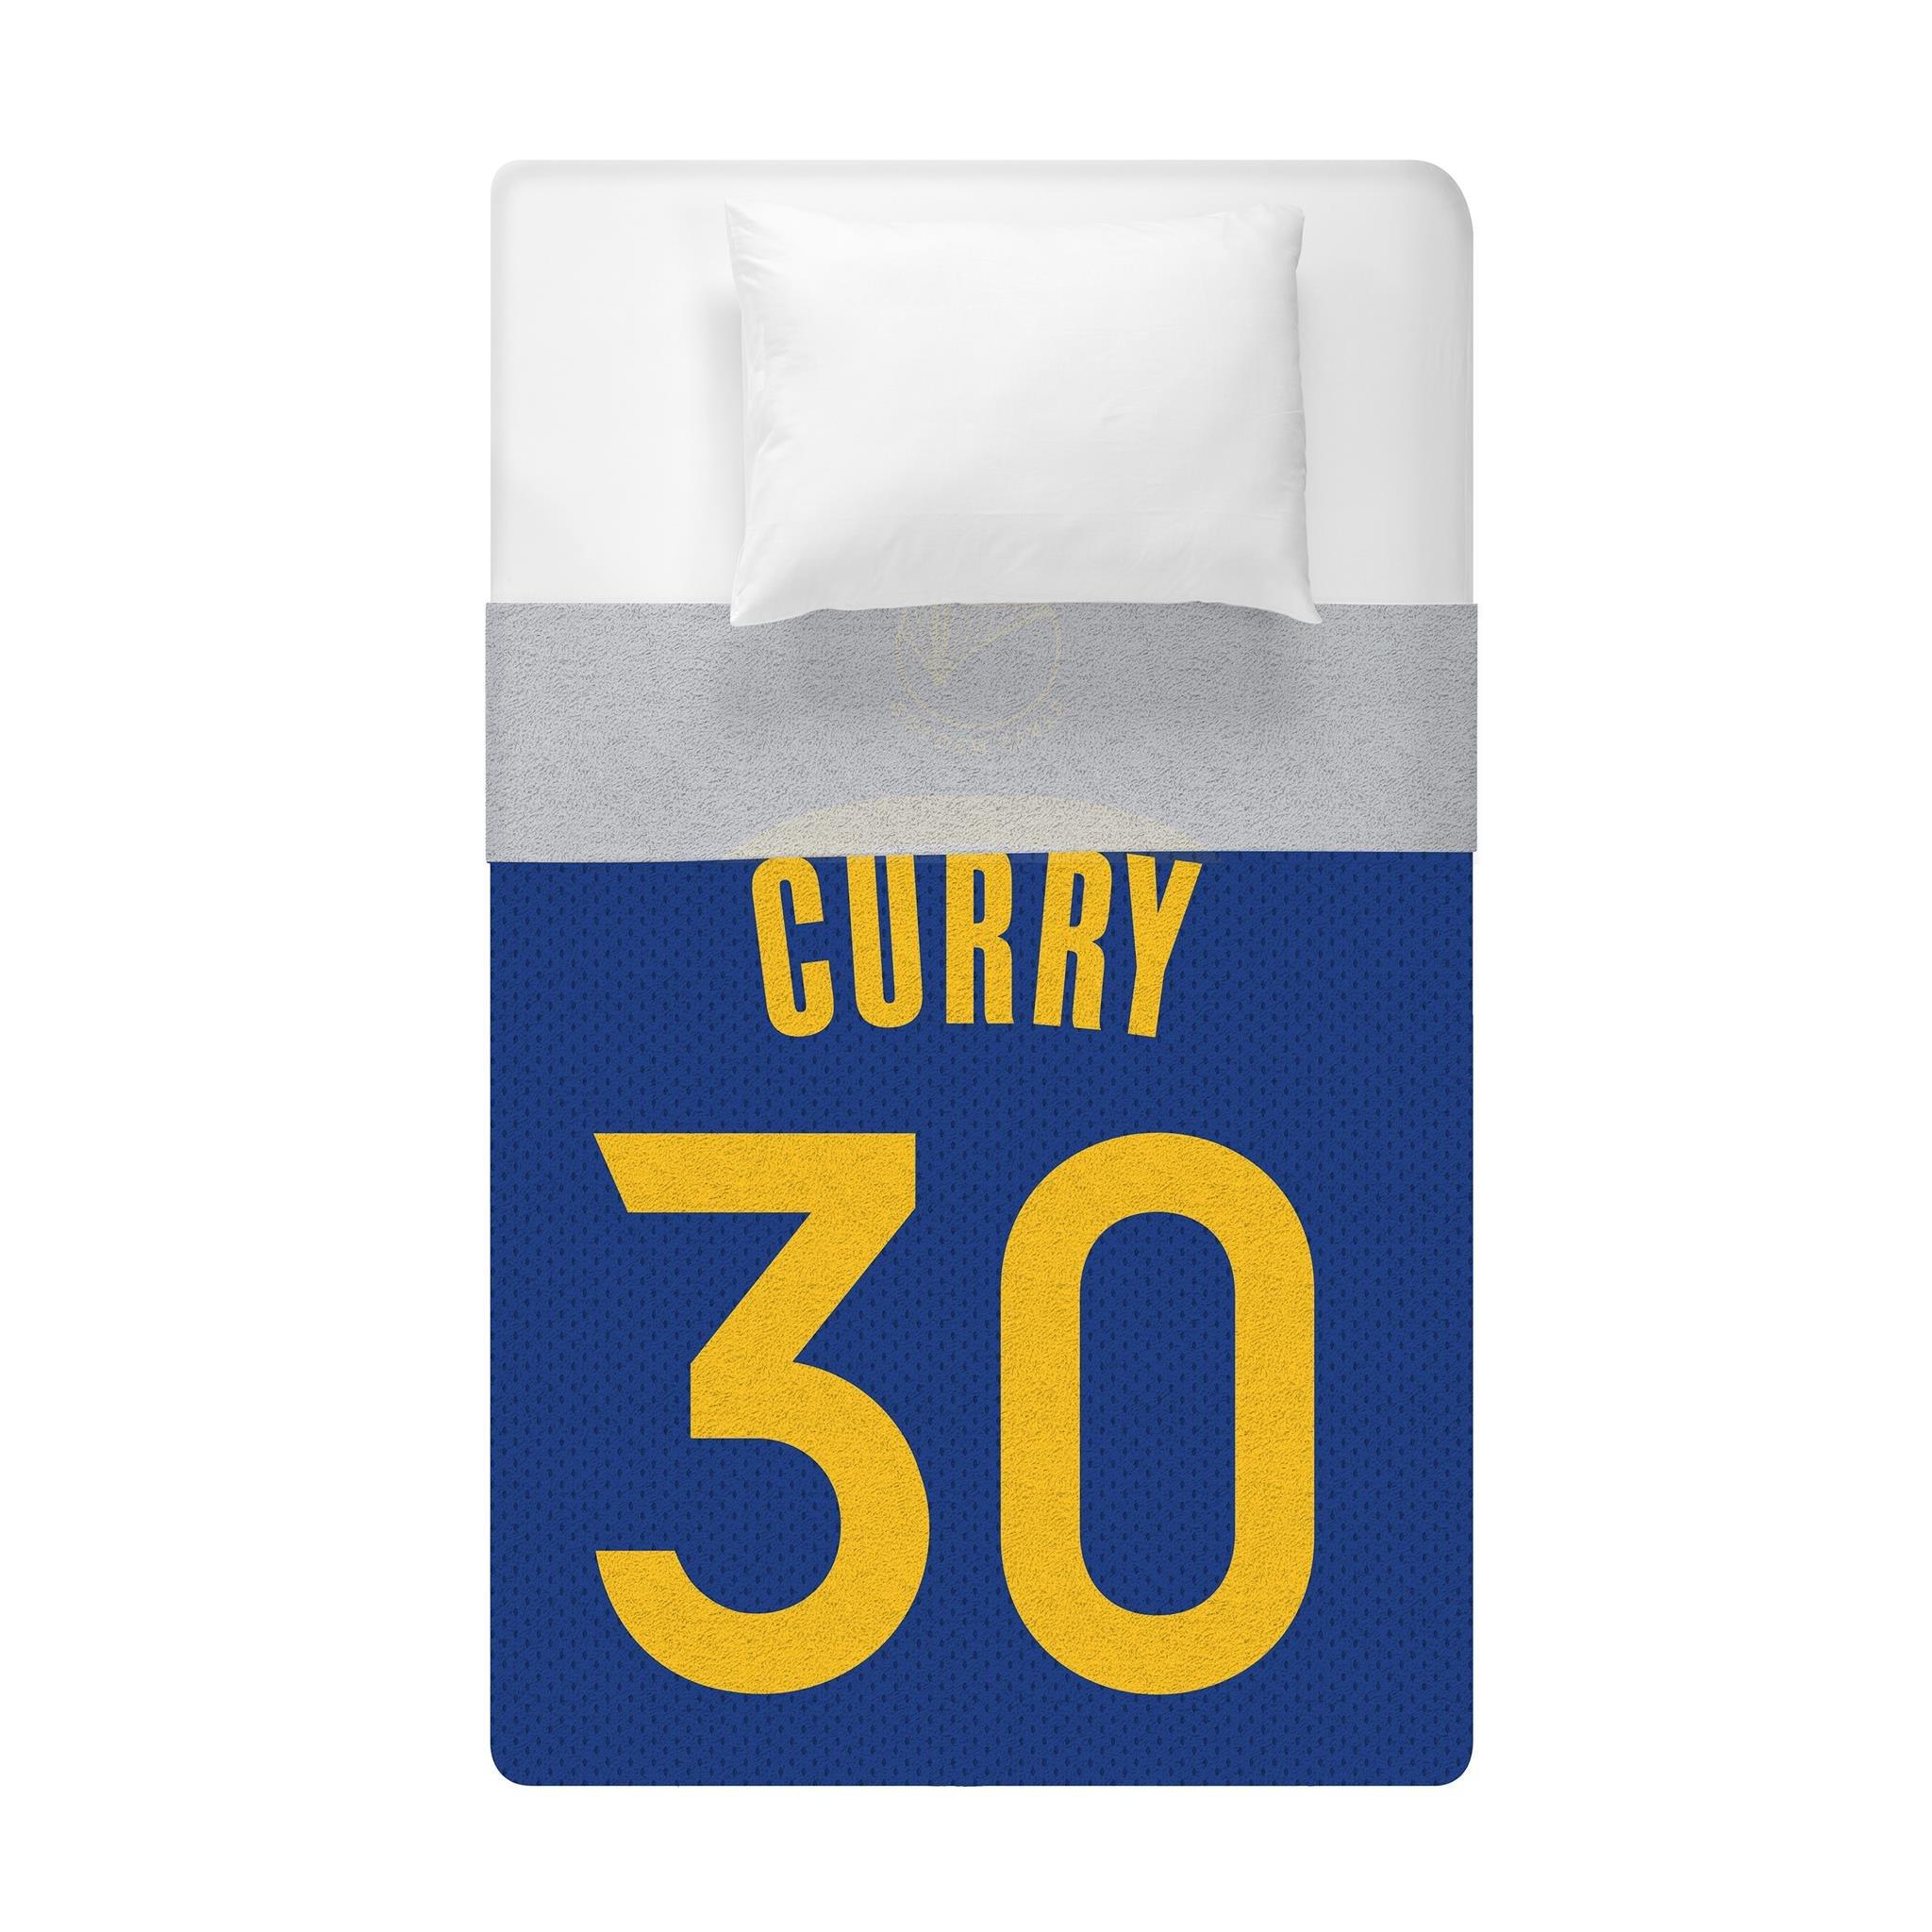 Sleep Squad NBA Golden State Warriors Stephen Curry SuperSoft Plush Blanket 60x80